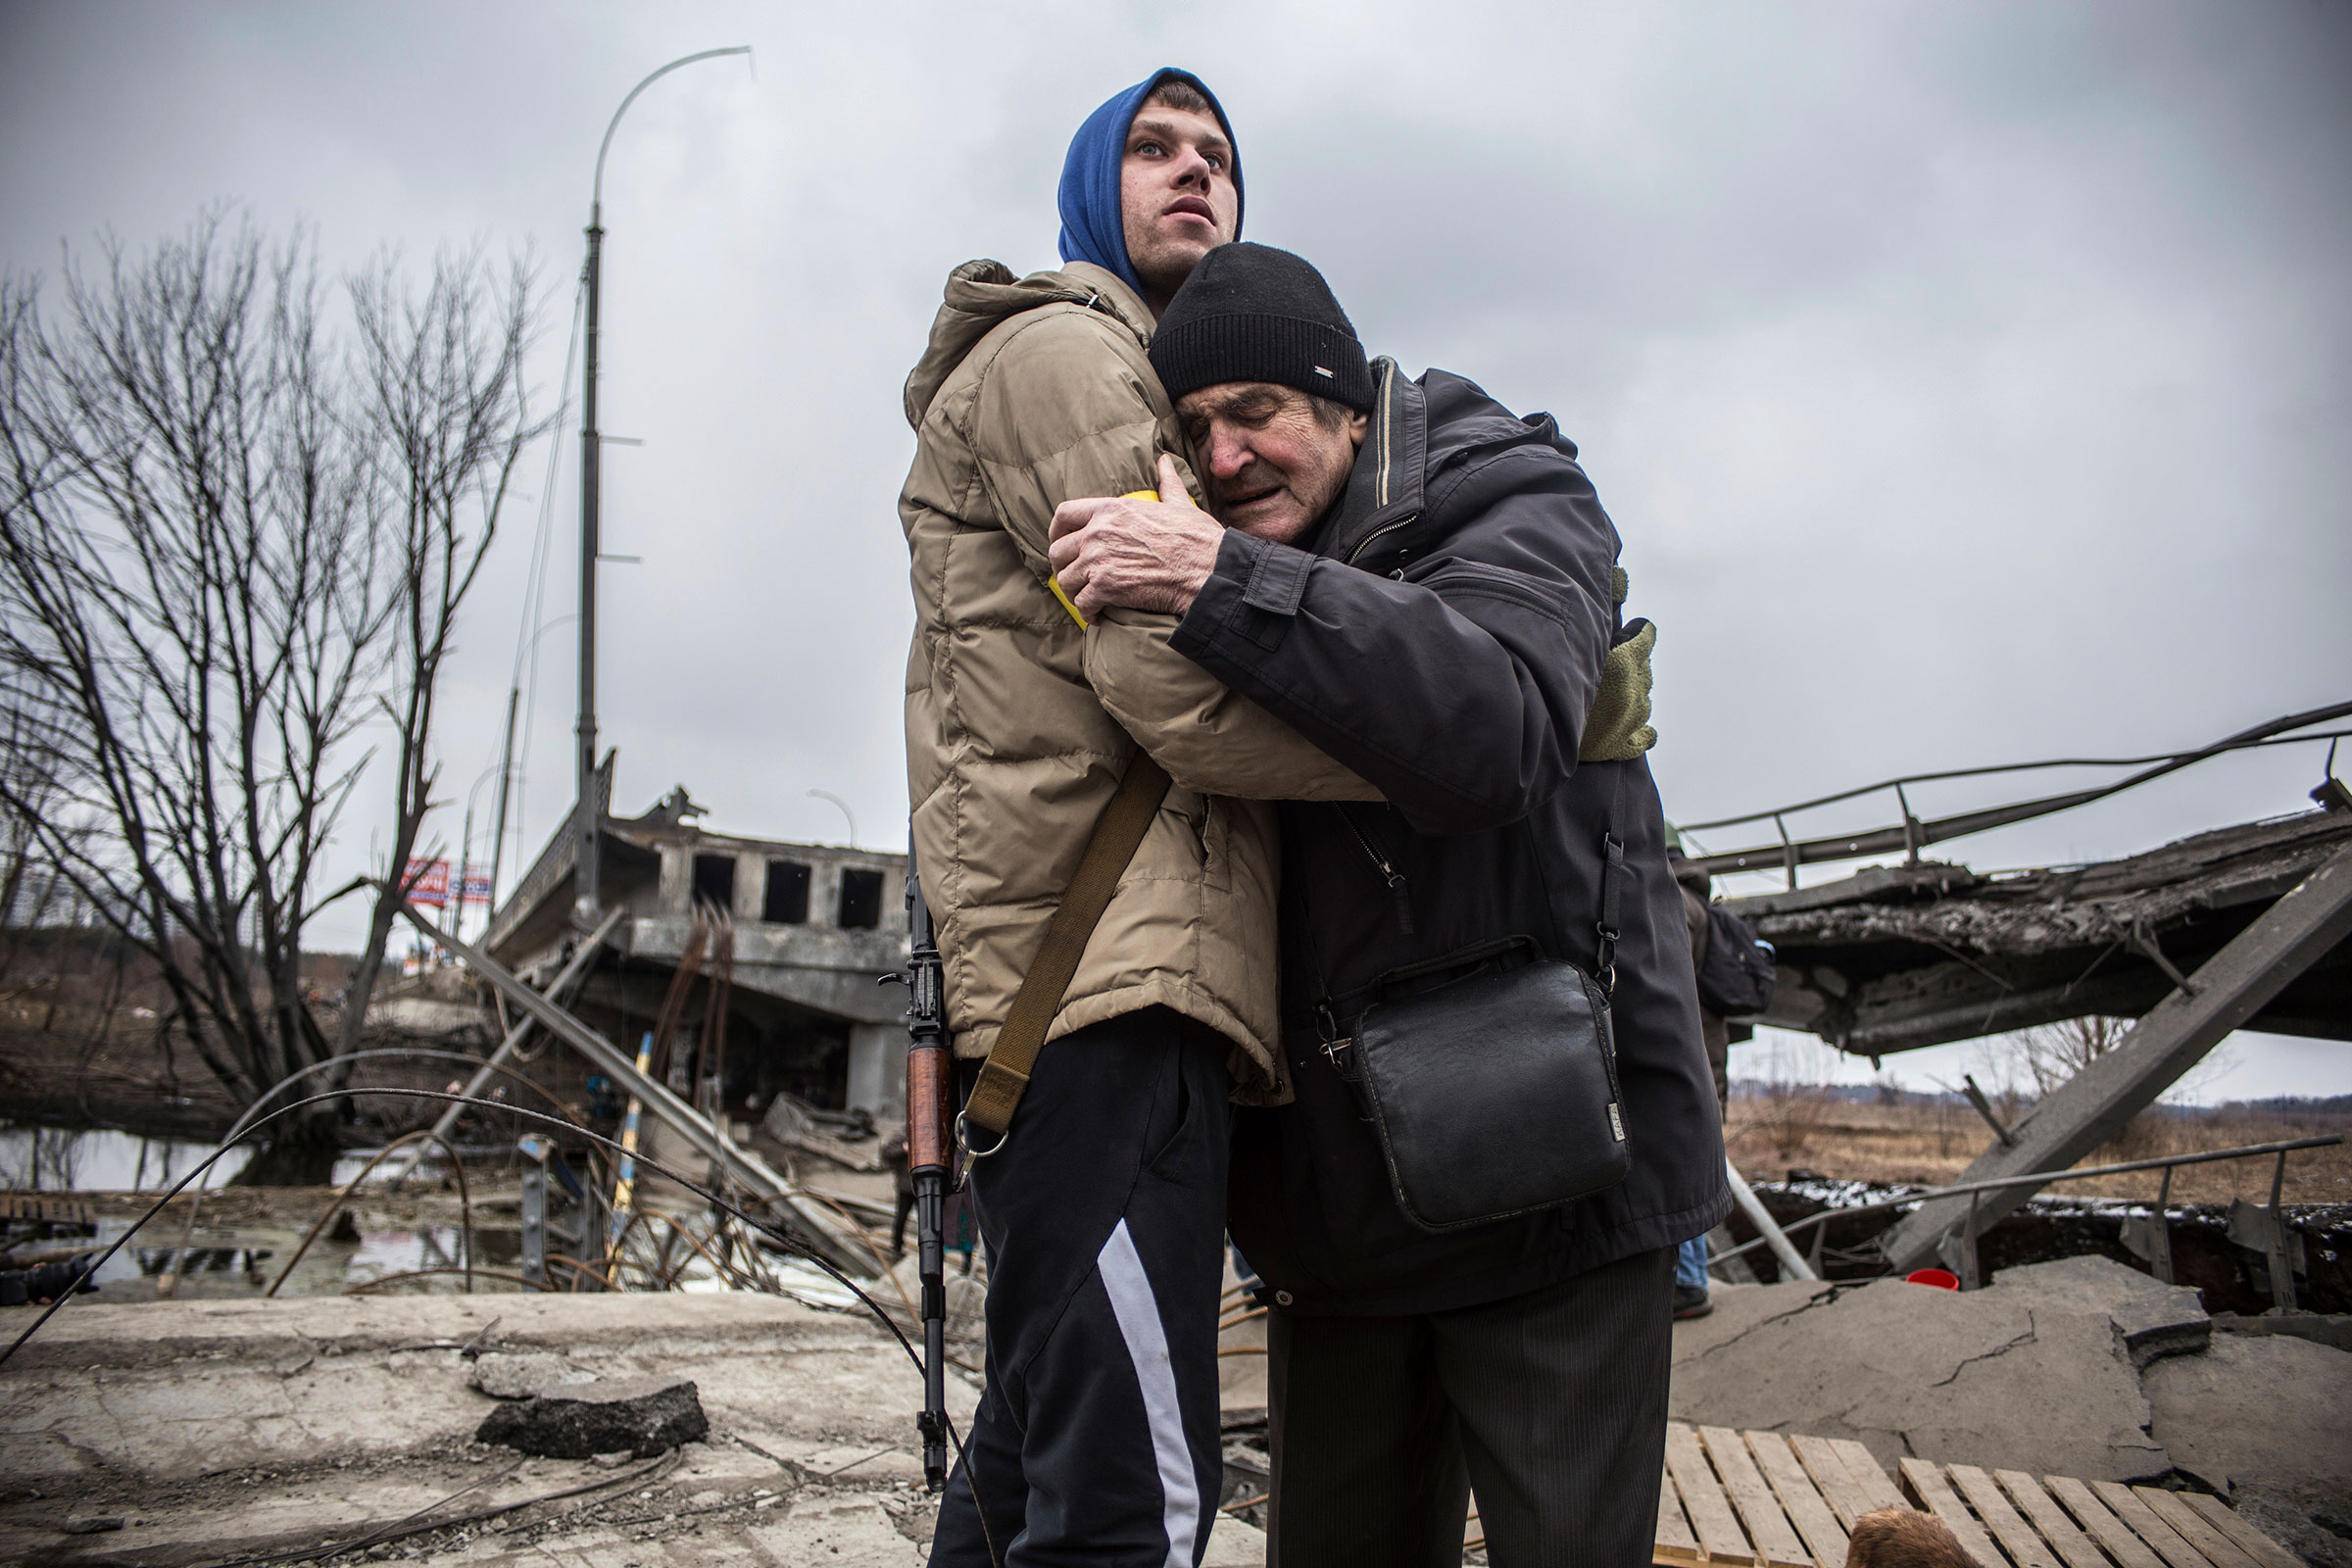 A Ukrainian Territorial Defense Forces member hugs a resident who leaves his home town following Russian artillery shelling in Irpin on March 9. (Oleksandr Ratushniak—AP)